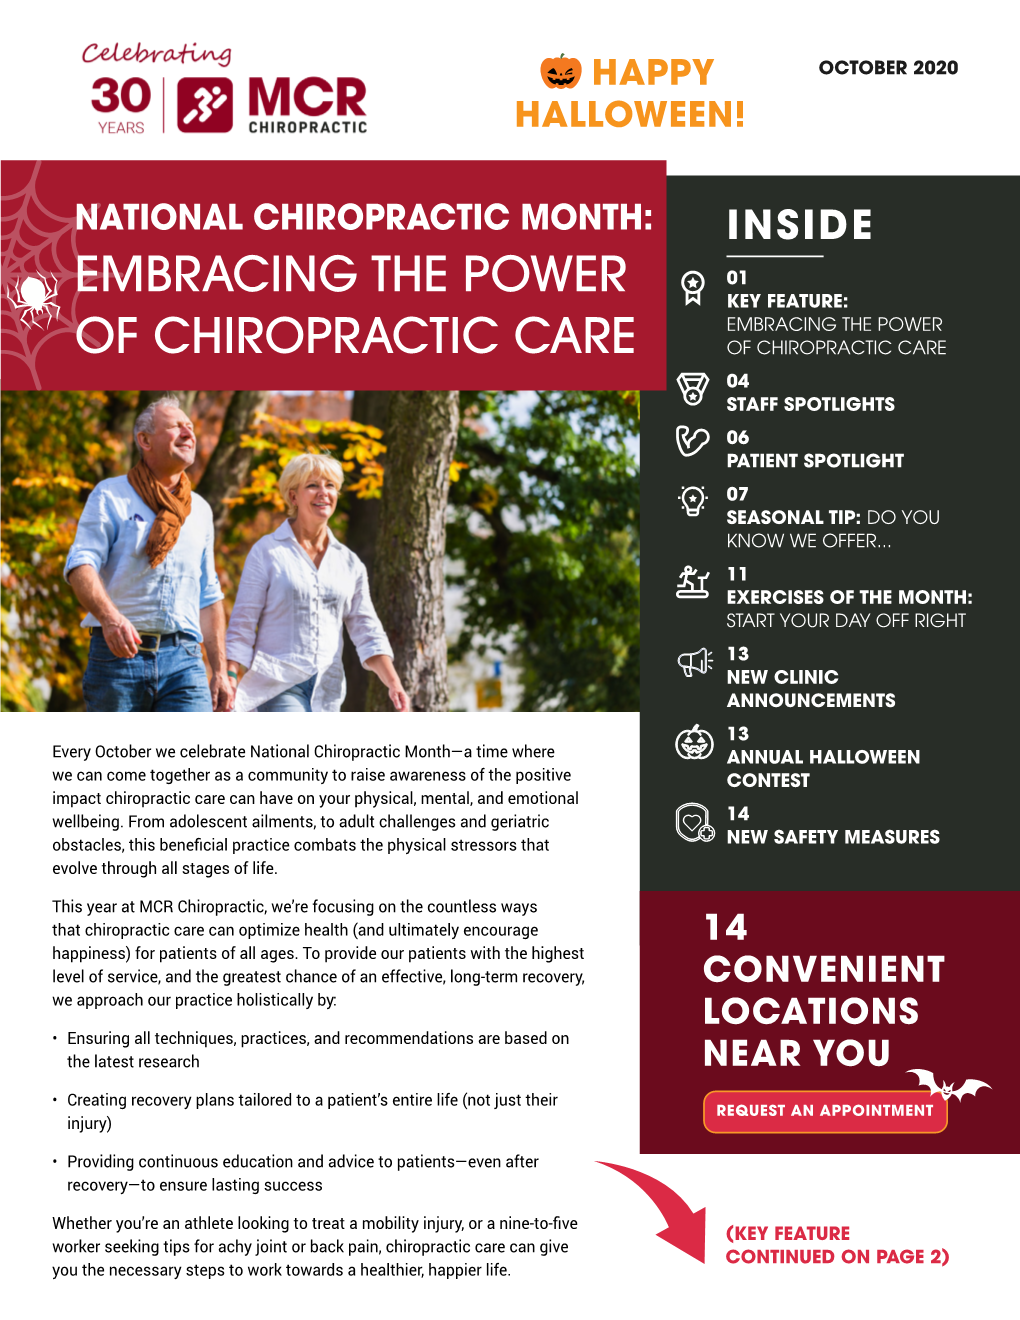 Embracing the Power of Chiropractic Care of Chiropractic Care 04 Staff Spotlights 06 Patient Spotlight 07 Seasonal Tip: Do You Know We Offer